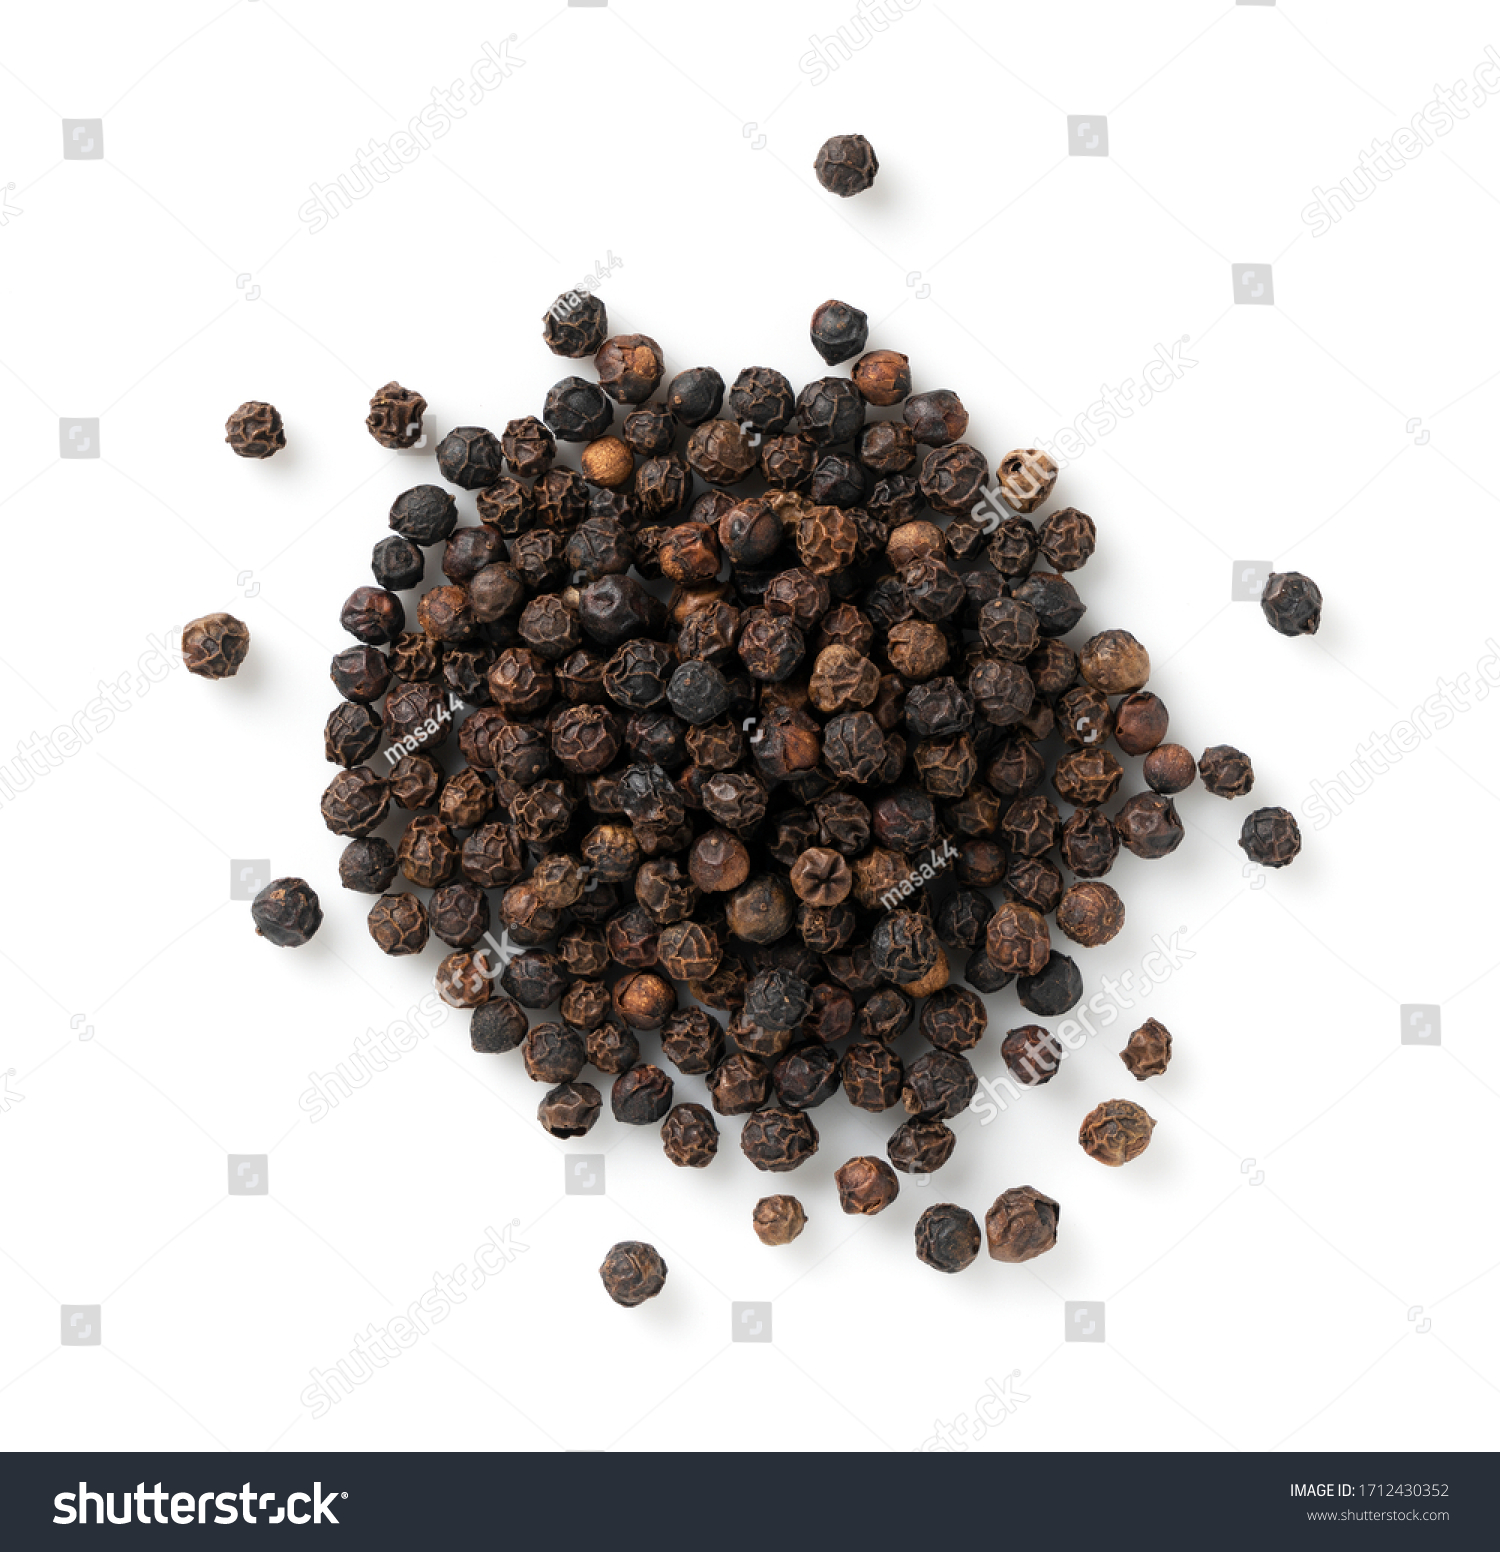 Black pepper placed on a white background #1712430352